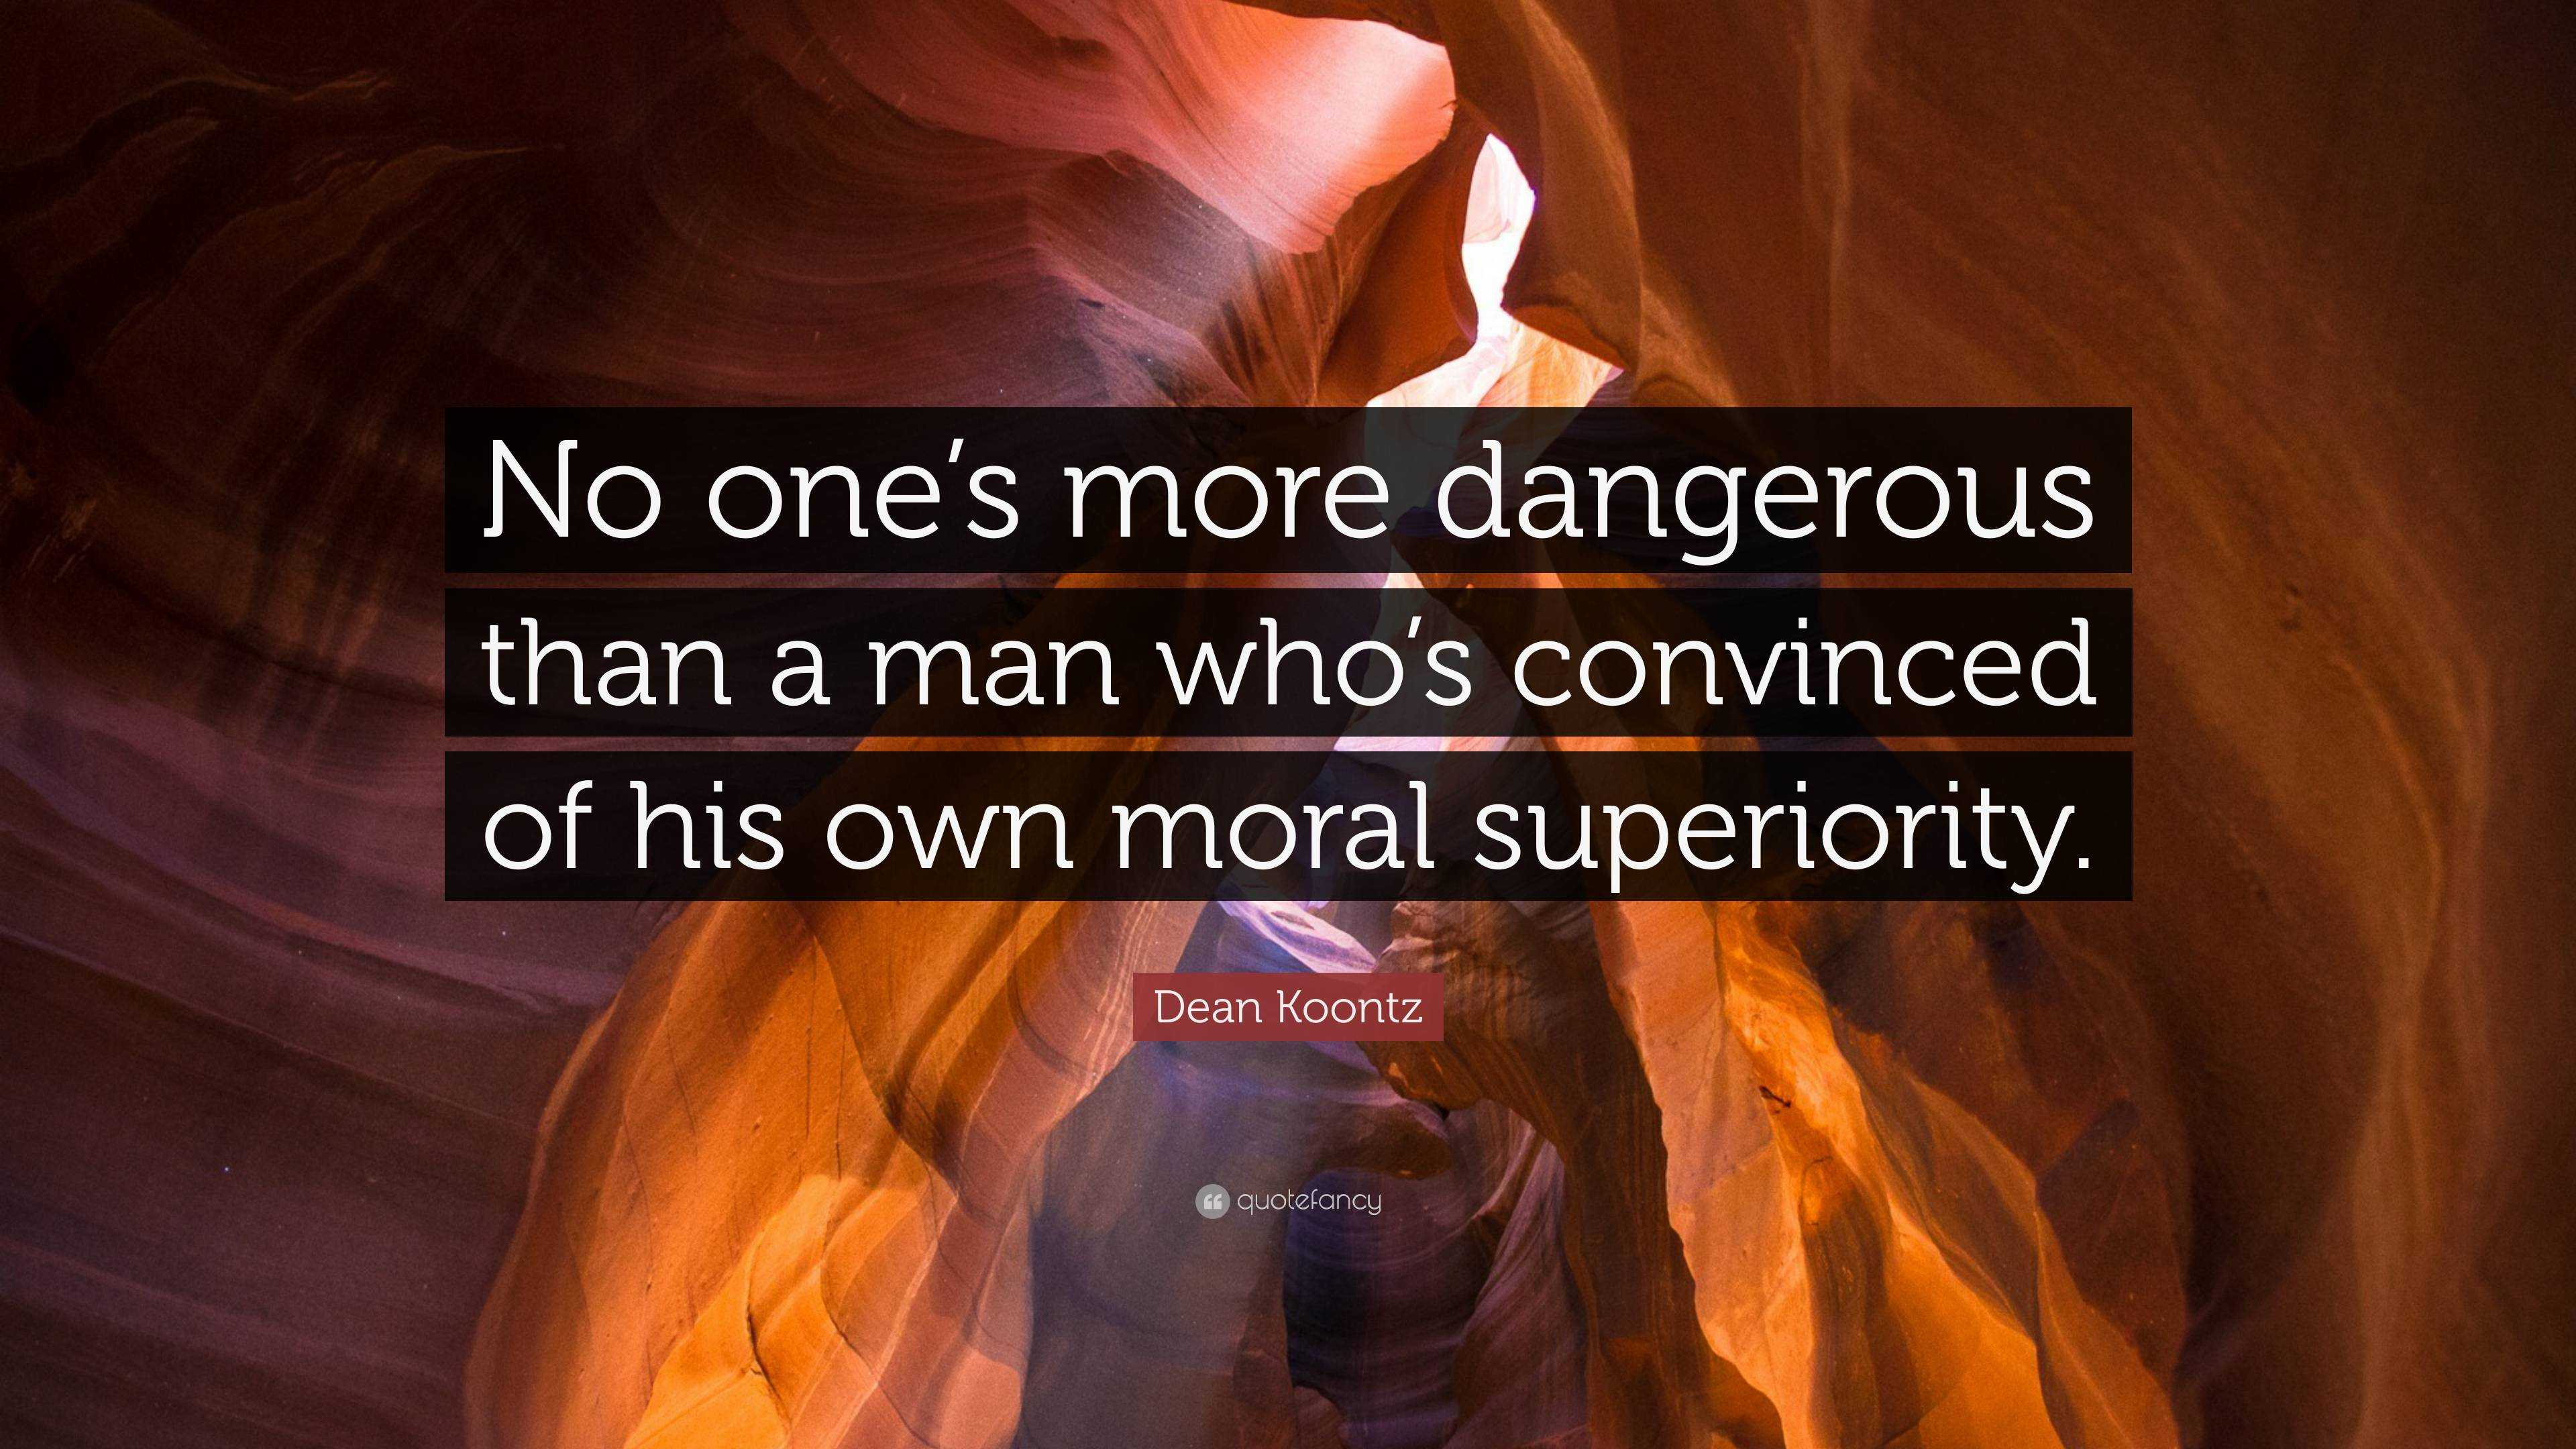 Dean Koontz Quote: “No one’s more dangerous than a man who’s convinced ...